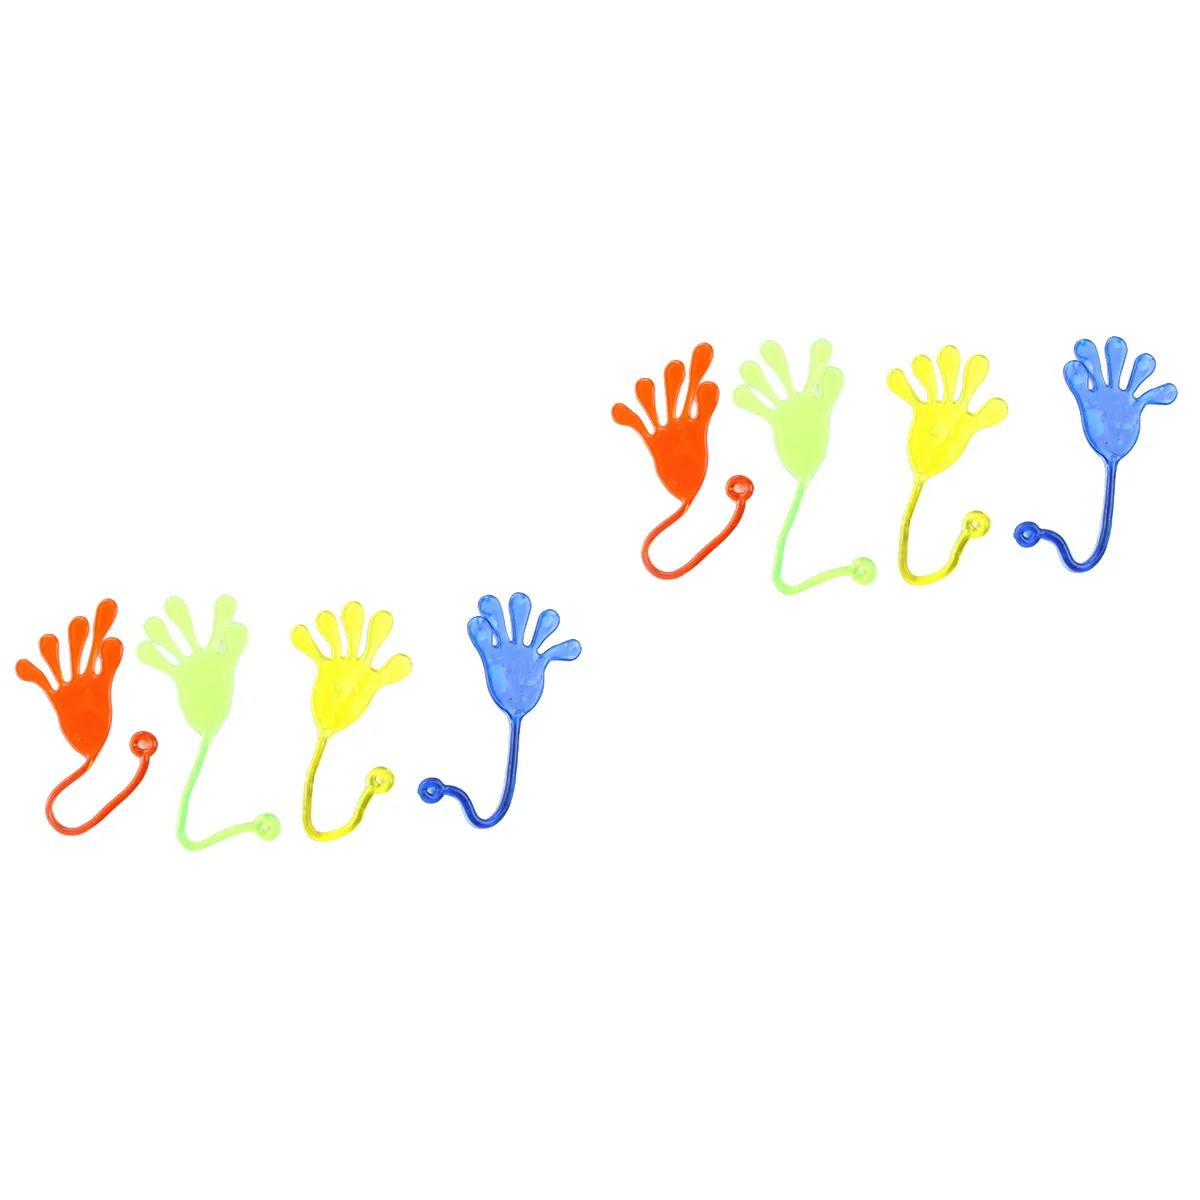 

36 pcs Sticky Hands Wacky Funny Stretchy Sticky Hands for Children Birthday Christmas Party Favors (Random Color)